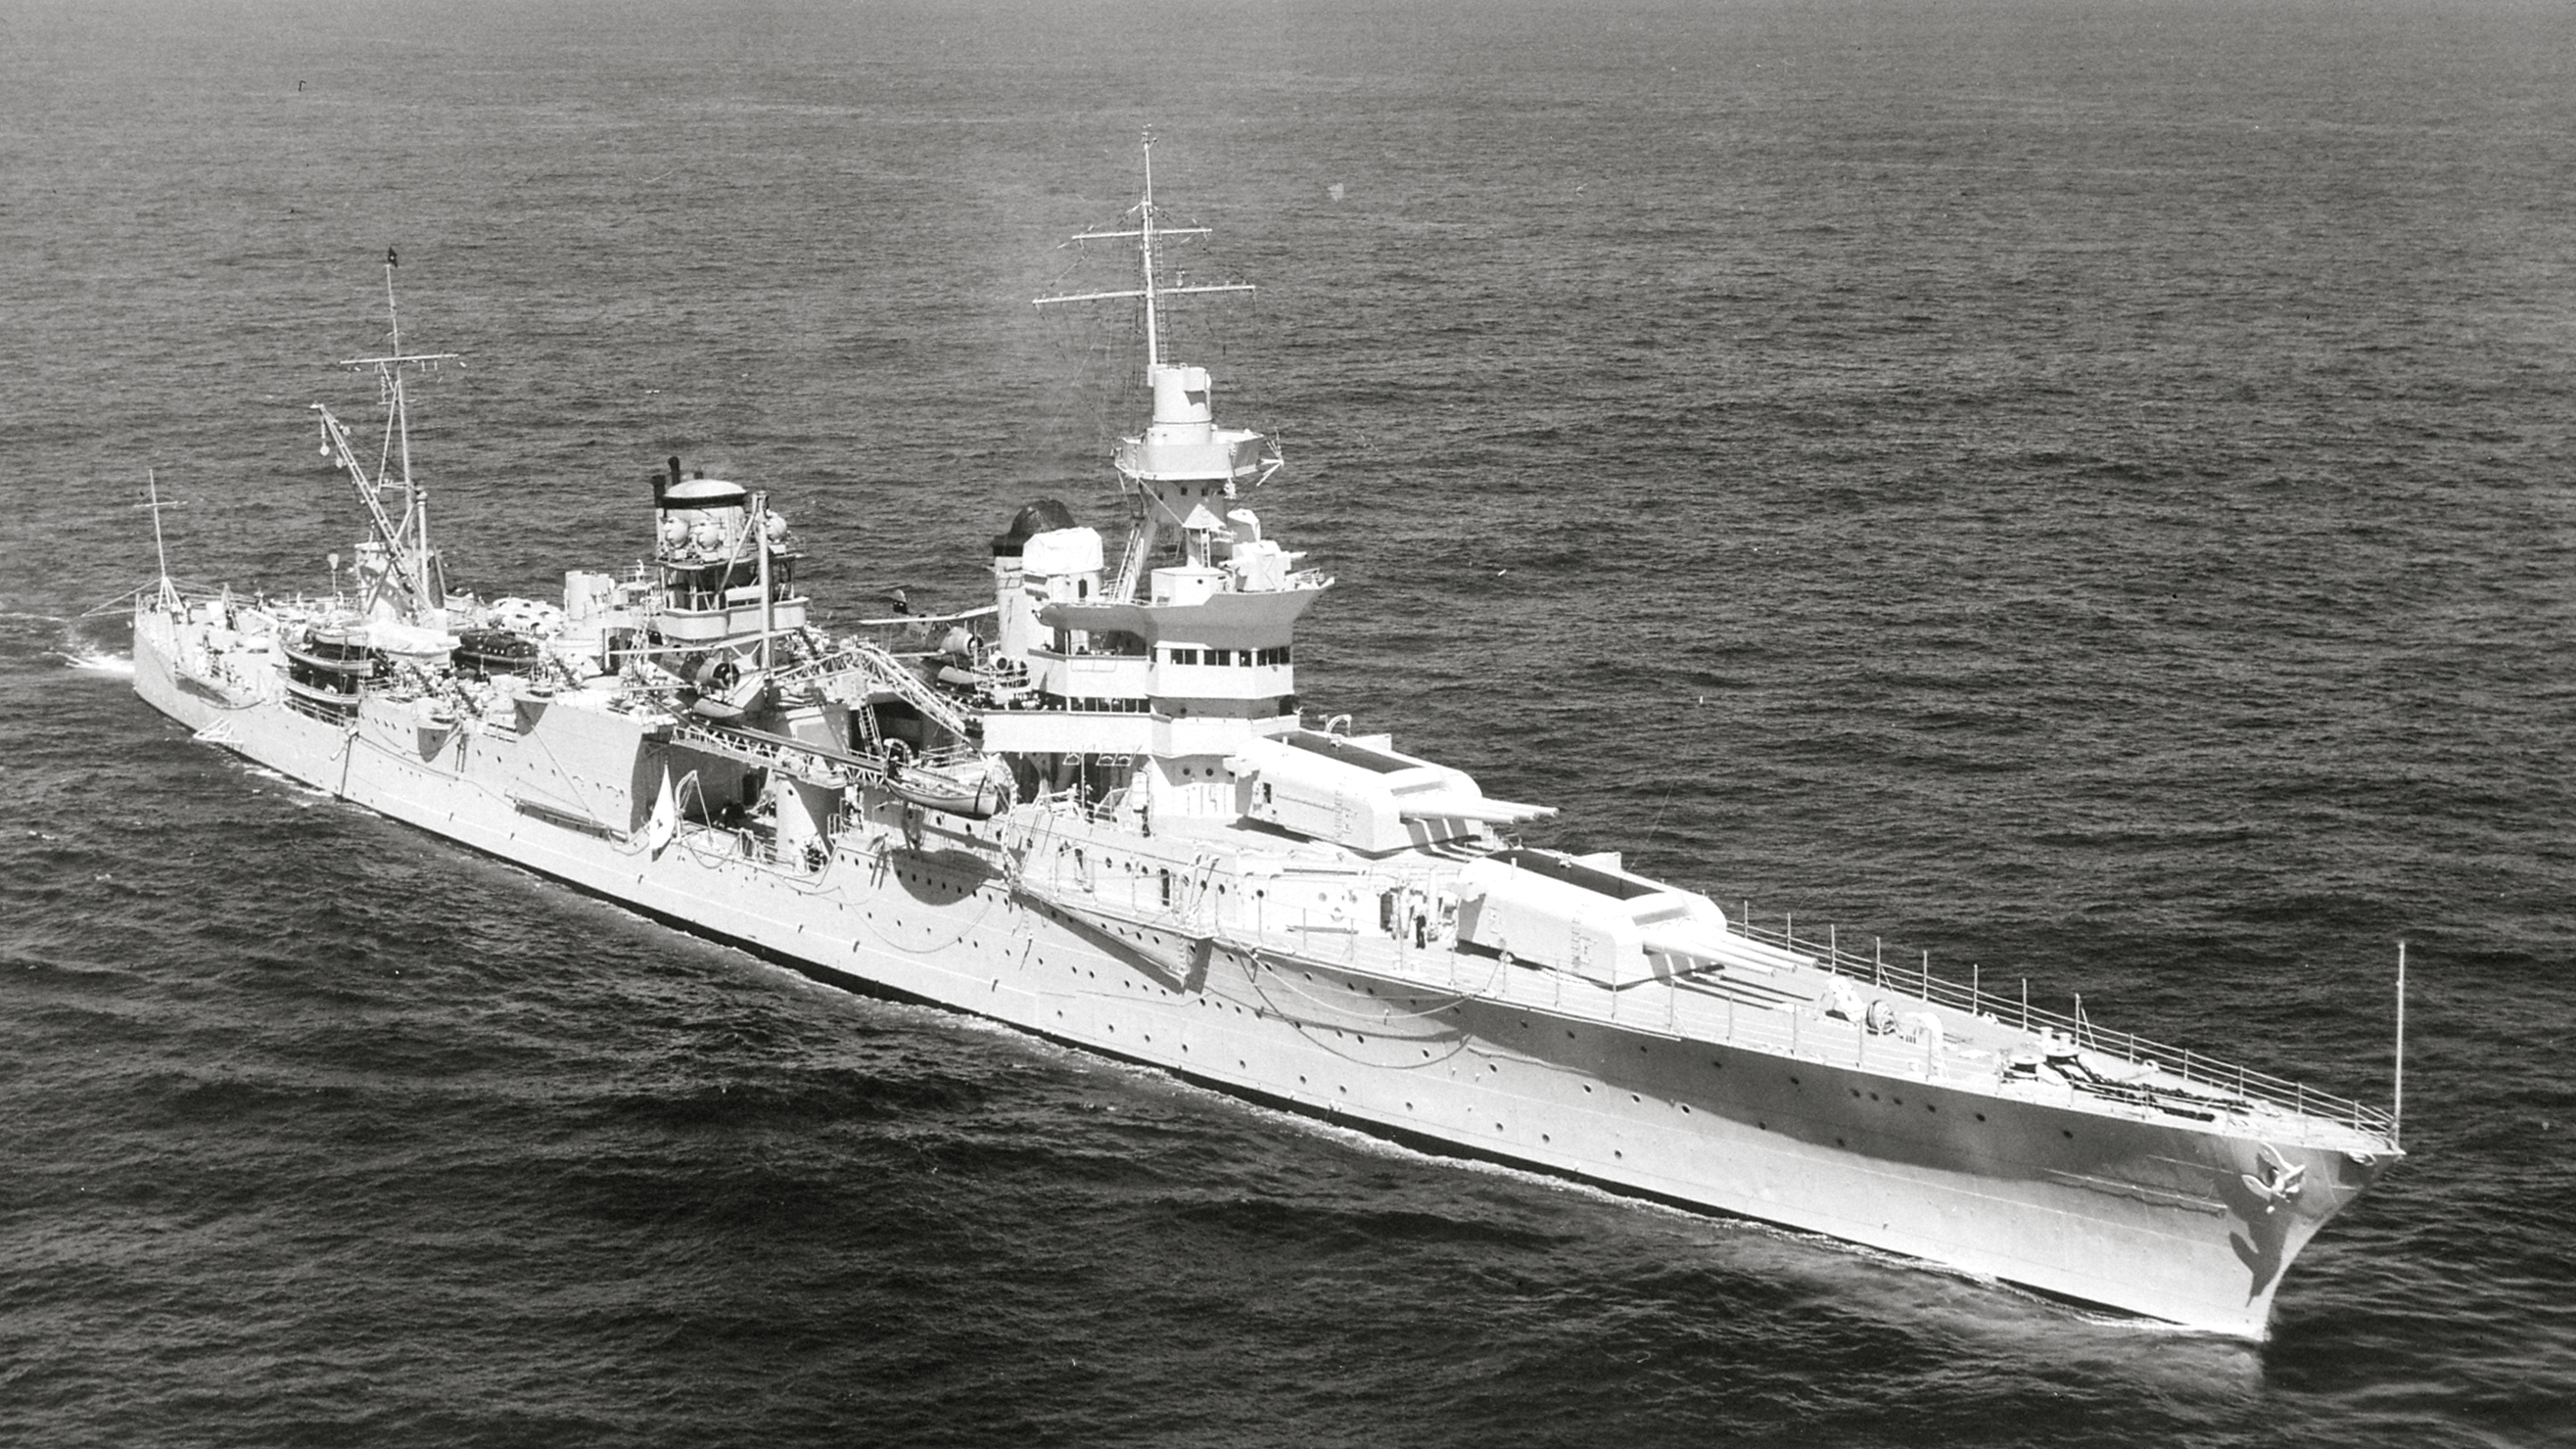 The USS Indianapolis displaced just over 10,000 standard tons, was 610 feet long and 584 feet wide. The ship’s propulsion system consisted of four giant Parsons steam turbines, powered by eight three-drum boilers that enabled a cruising speed of 33 knots 